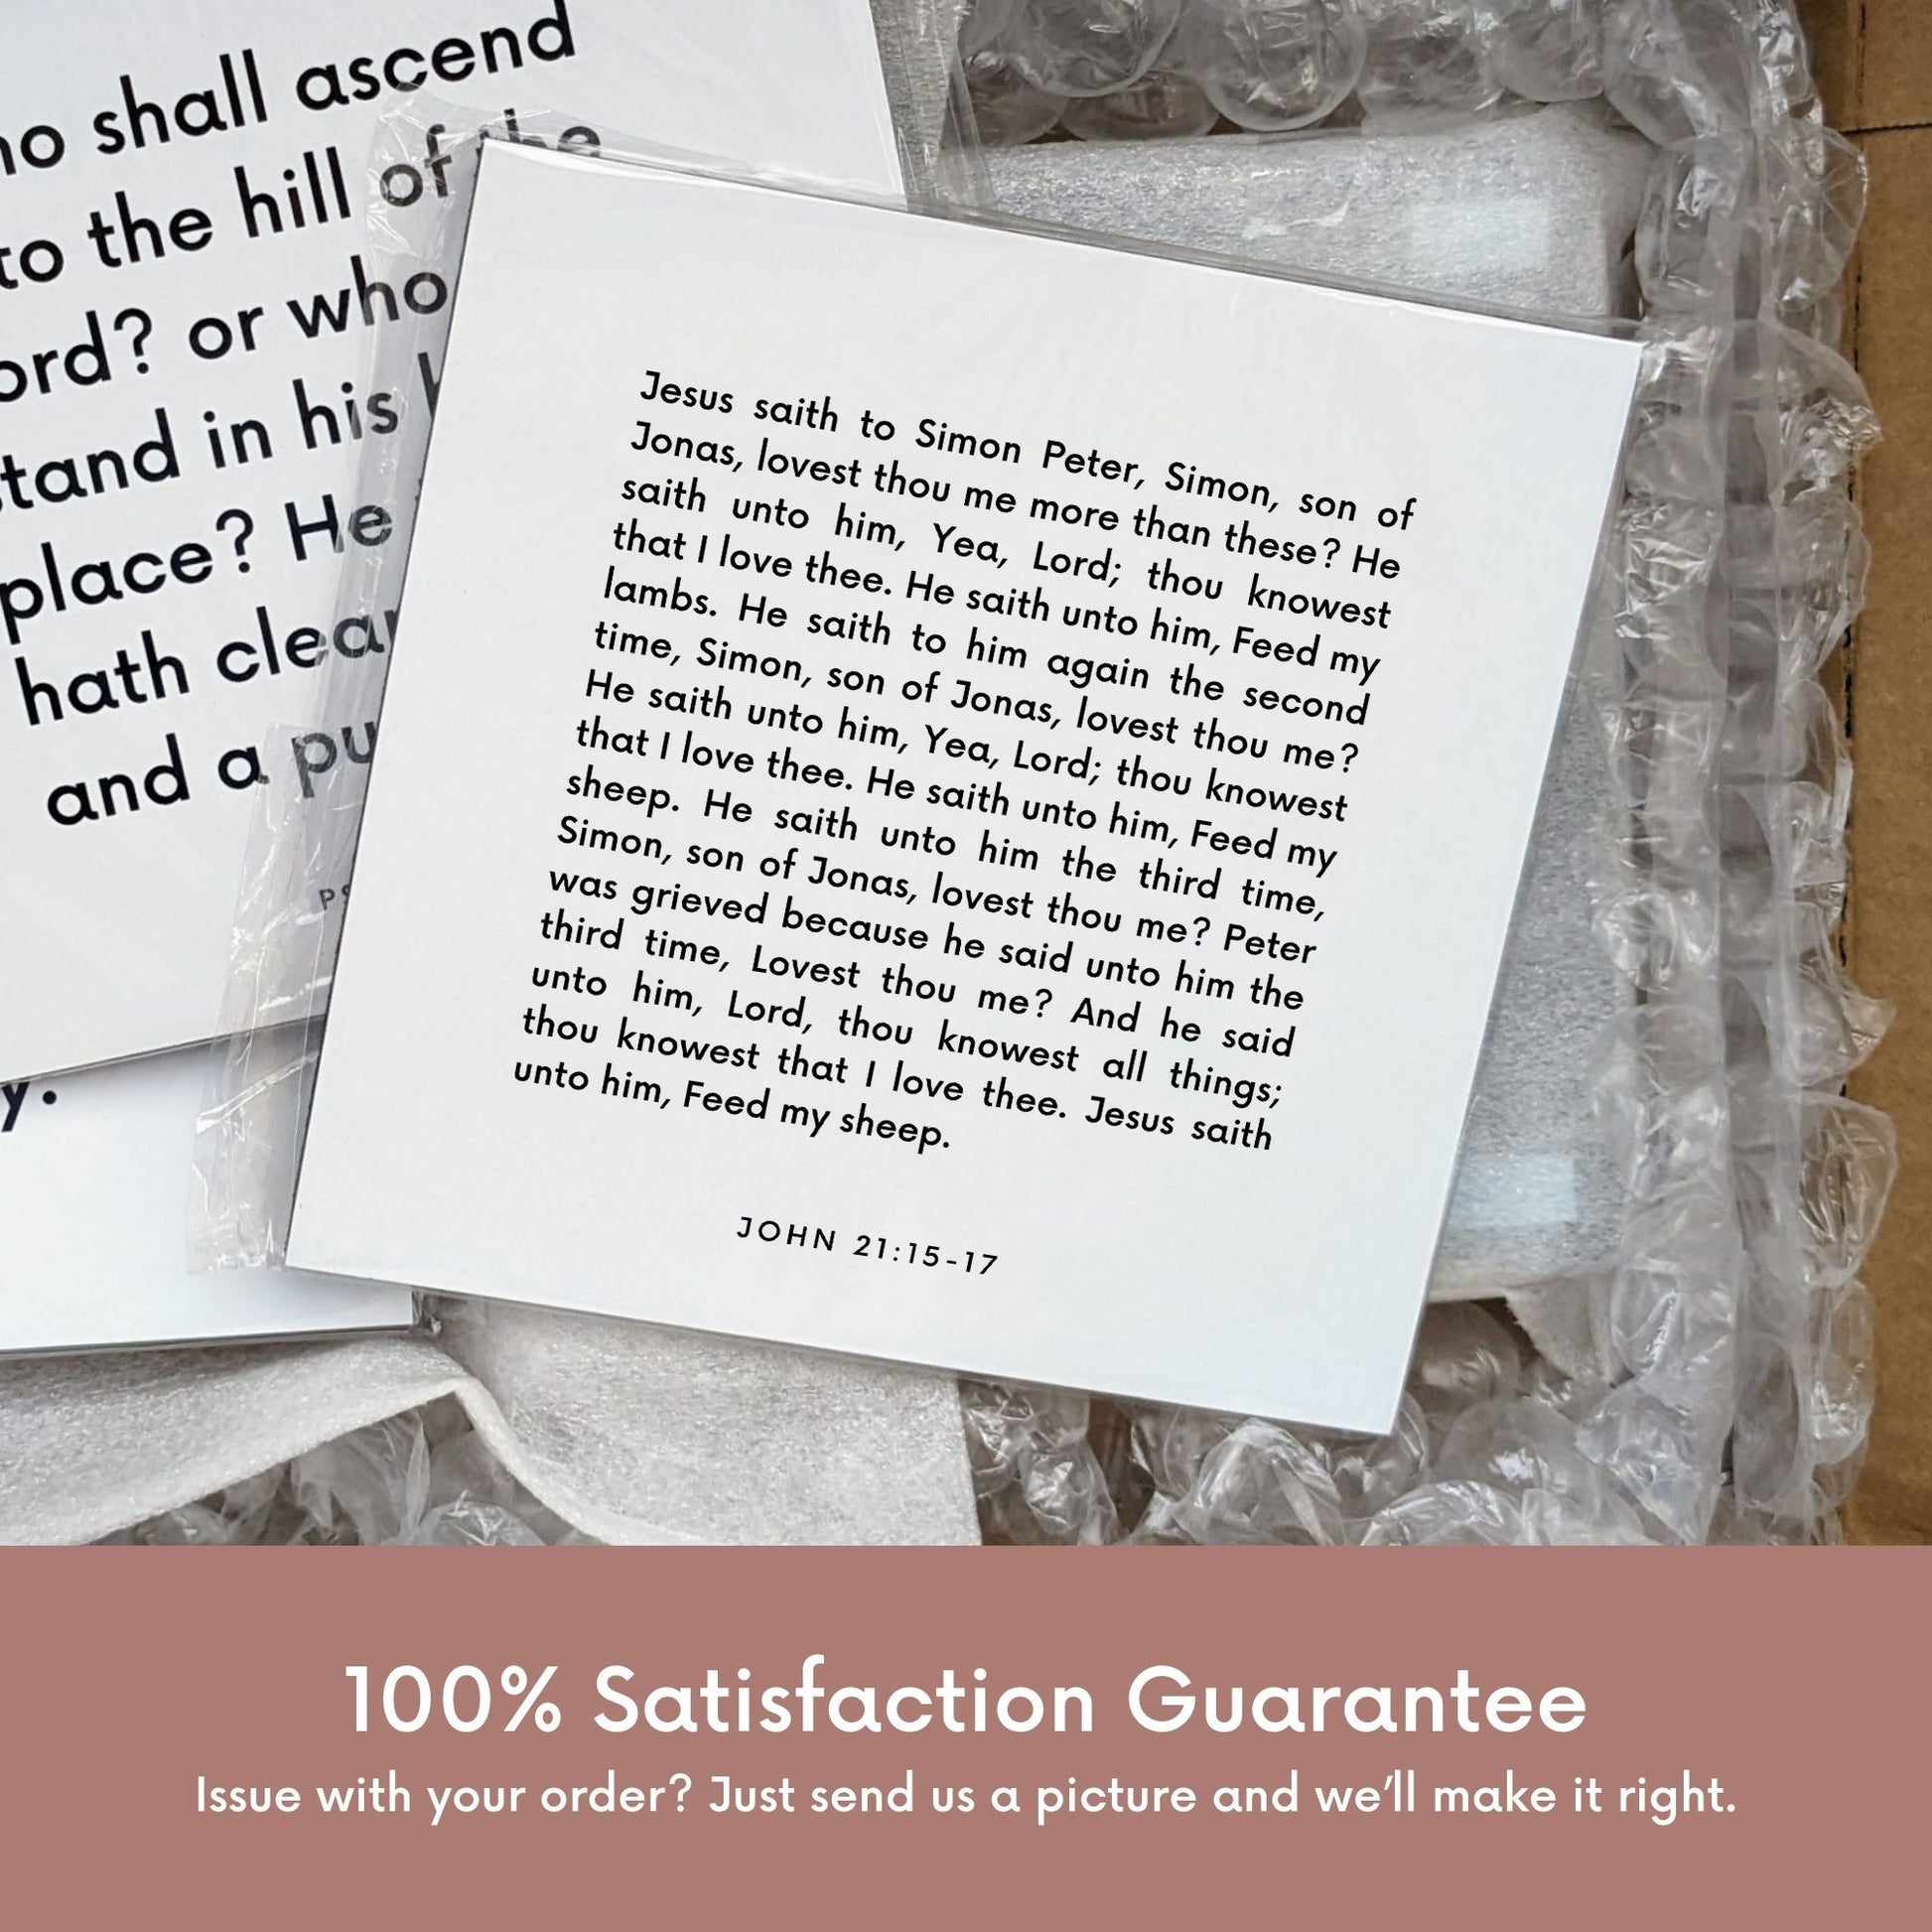 Shipping materials for scripture tile of John 21:15-17 - "Lord, thou knowest that I love thee"